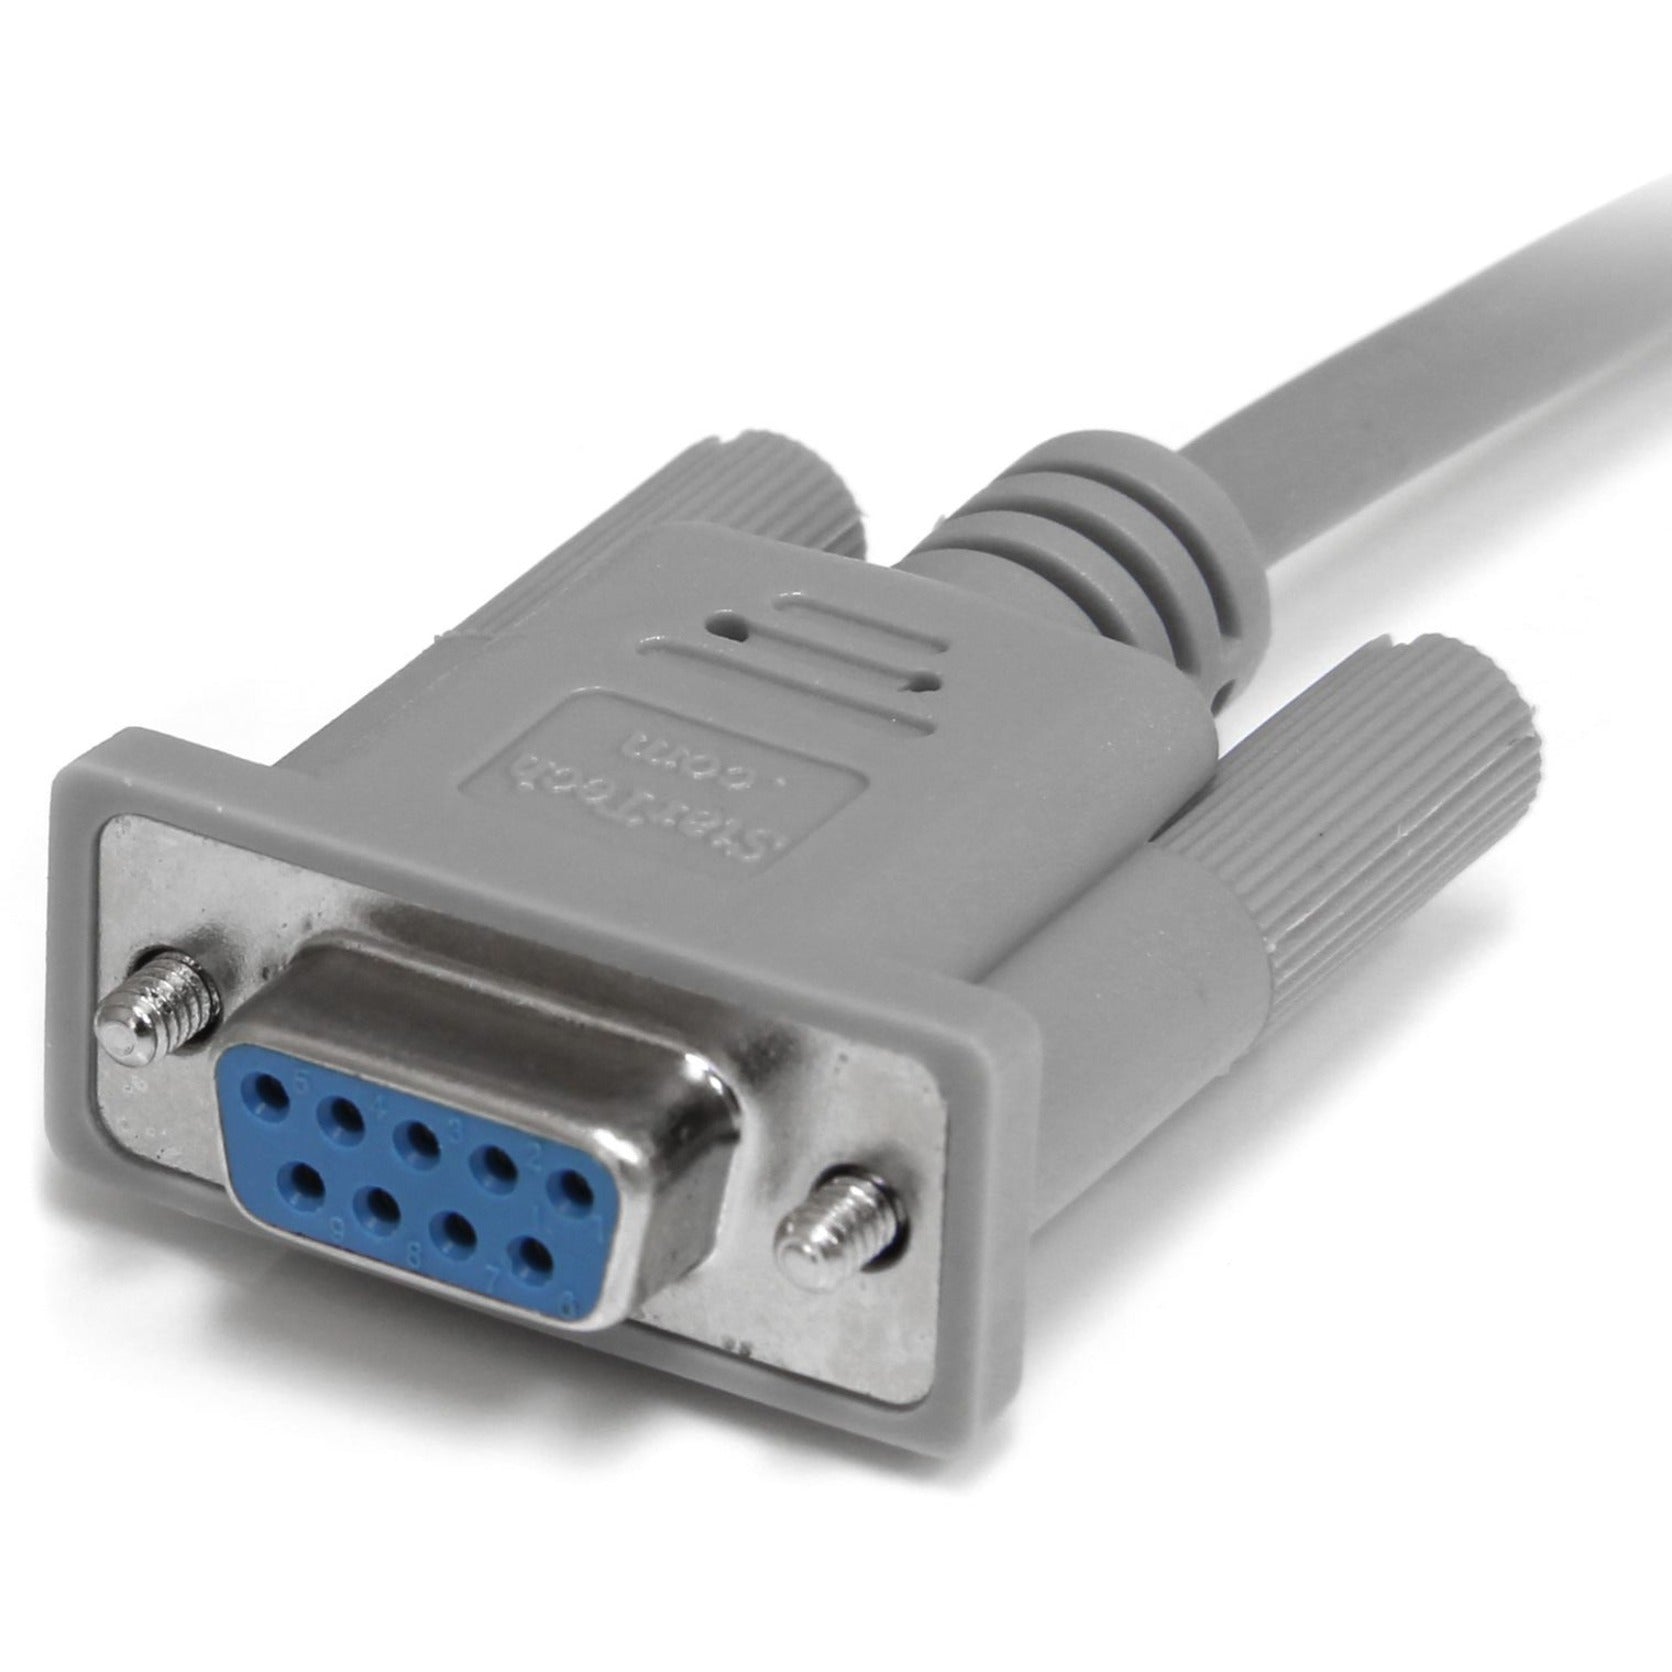 StarTech.com SCNM9FM Serial Null Modem Cable, 10 ft. Cross Wired, DB9 F/M